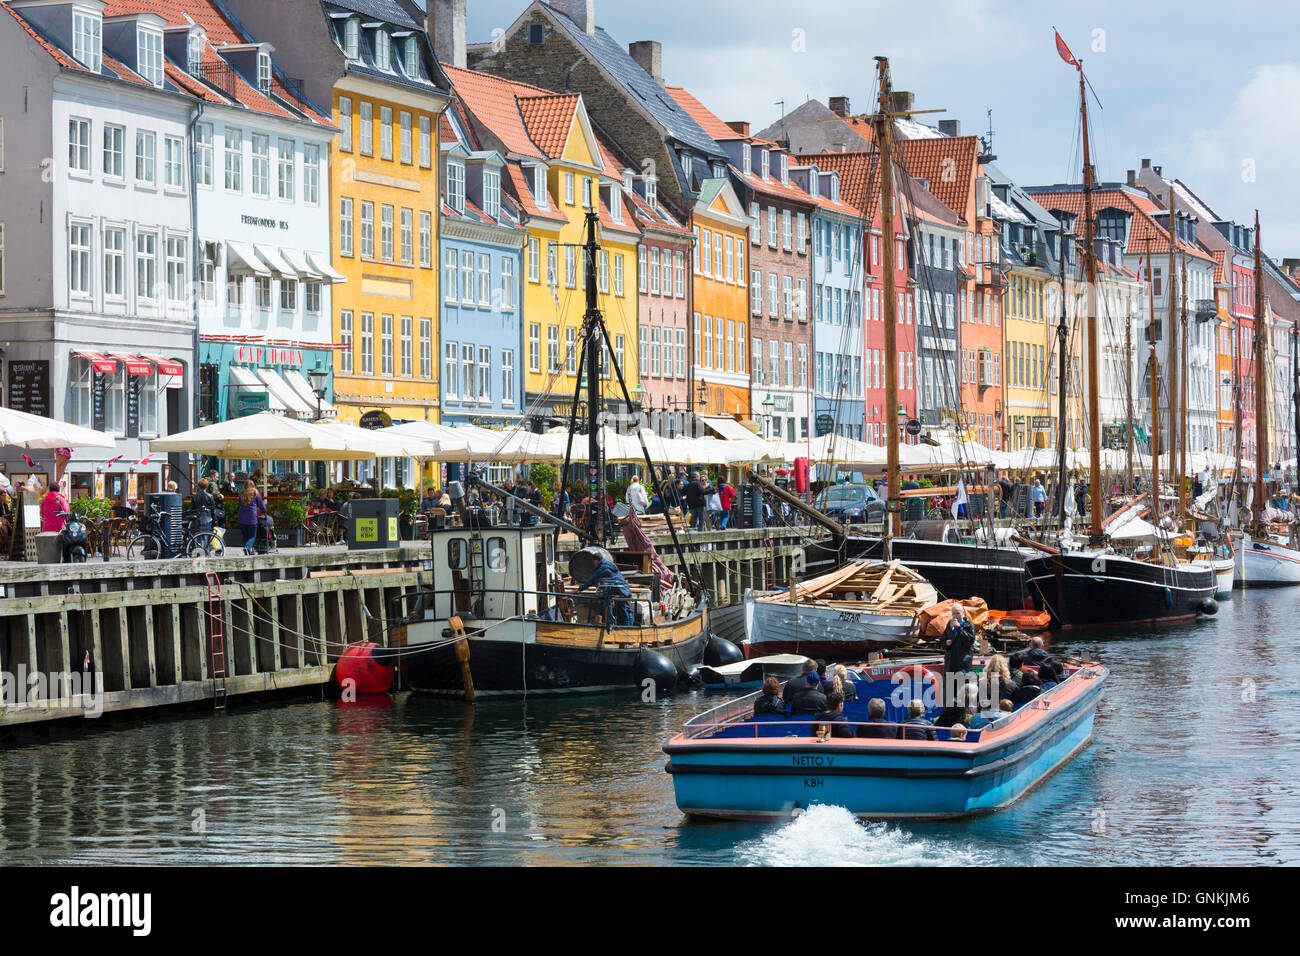 Sailing boats at famous Nyhavn, 17th Century waterfront canal and entertainment district in Copenhagen, Denmark Stock Photo